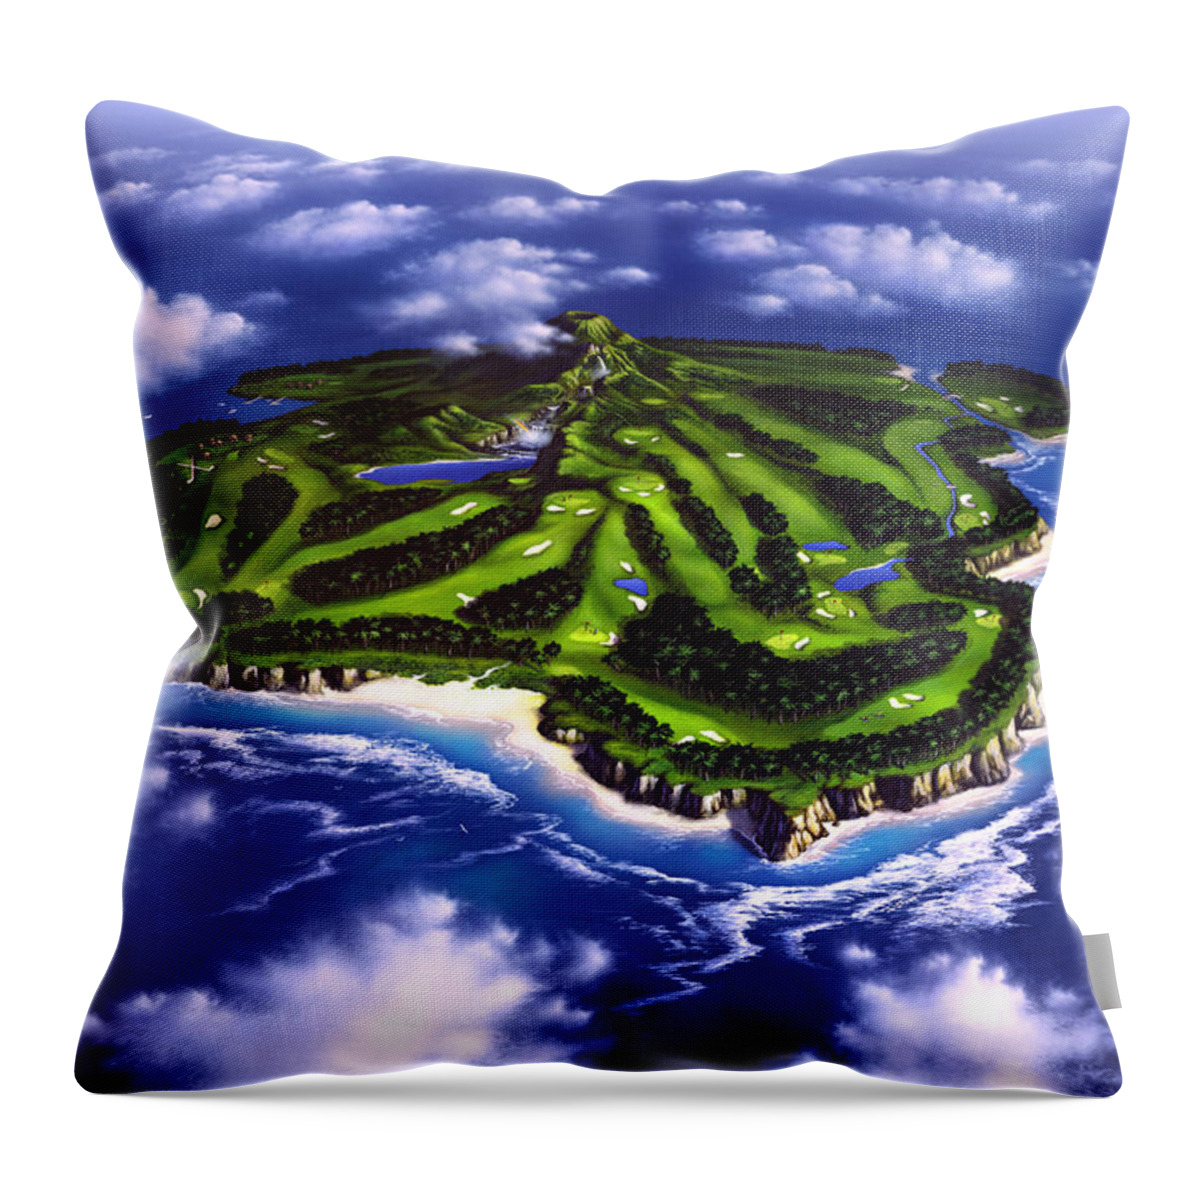 Golf Throw Pillow featuring the painting Golfer's Paradise by Jerry LoFaro